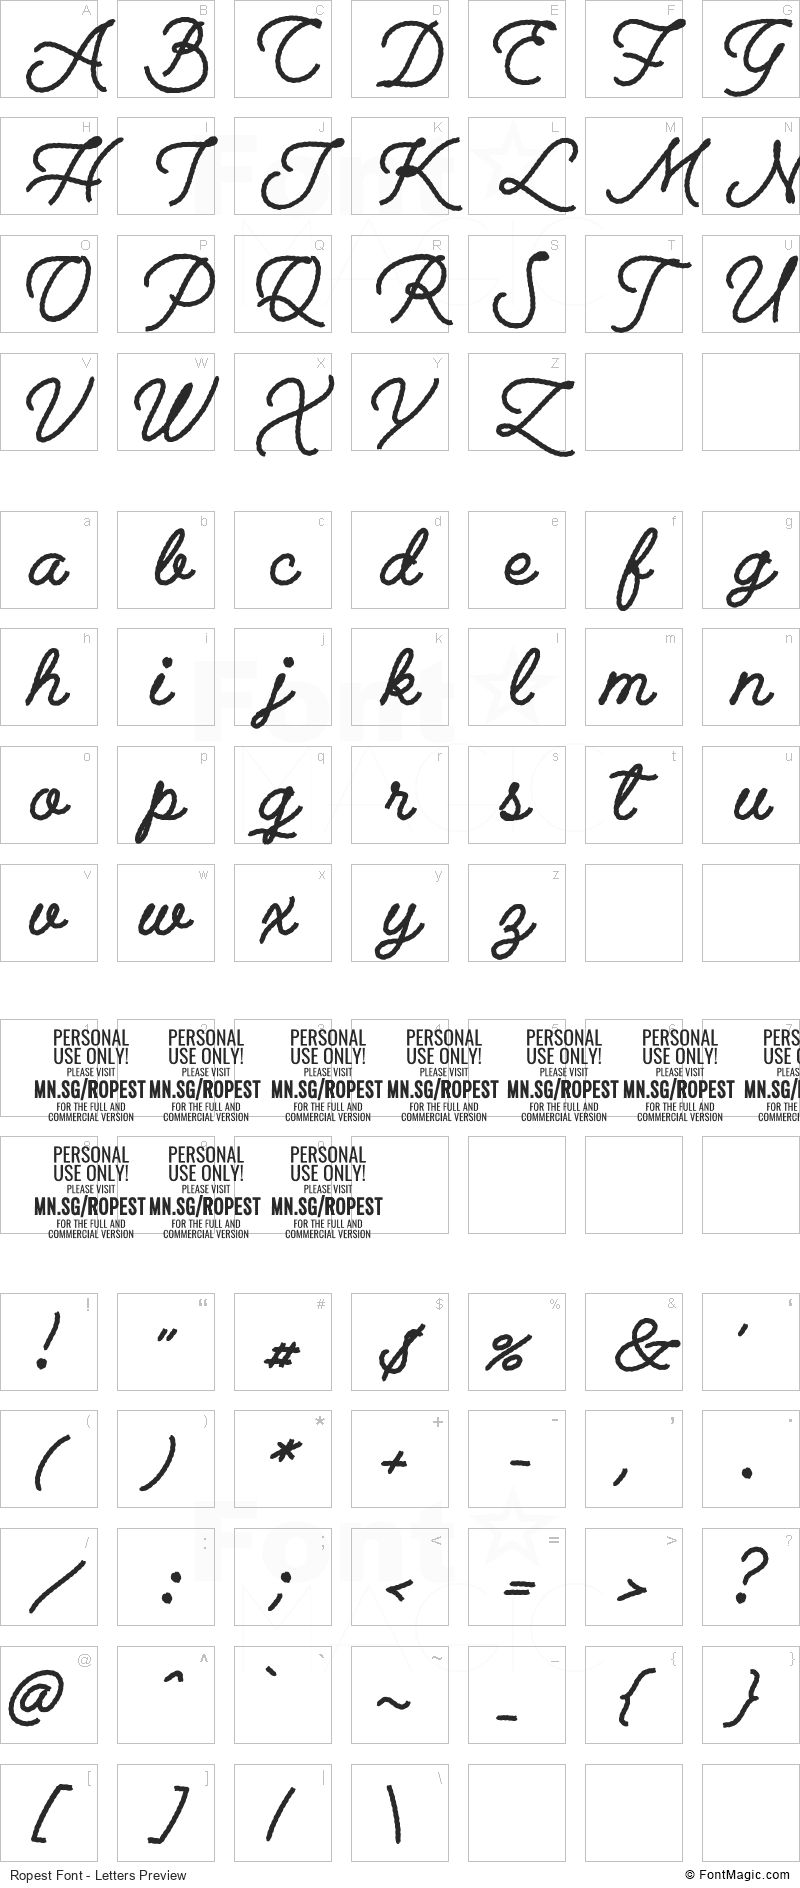 Ropest Font - All Latters Preview Chart